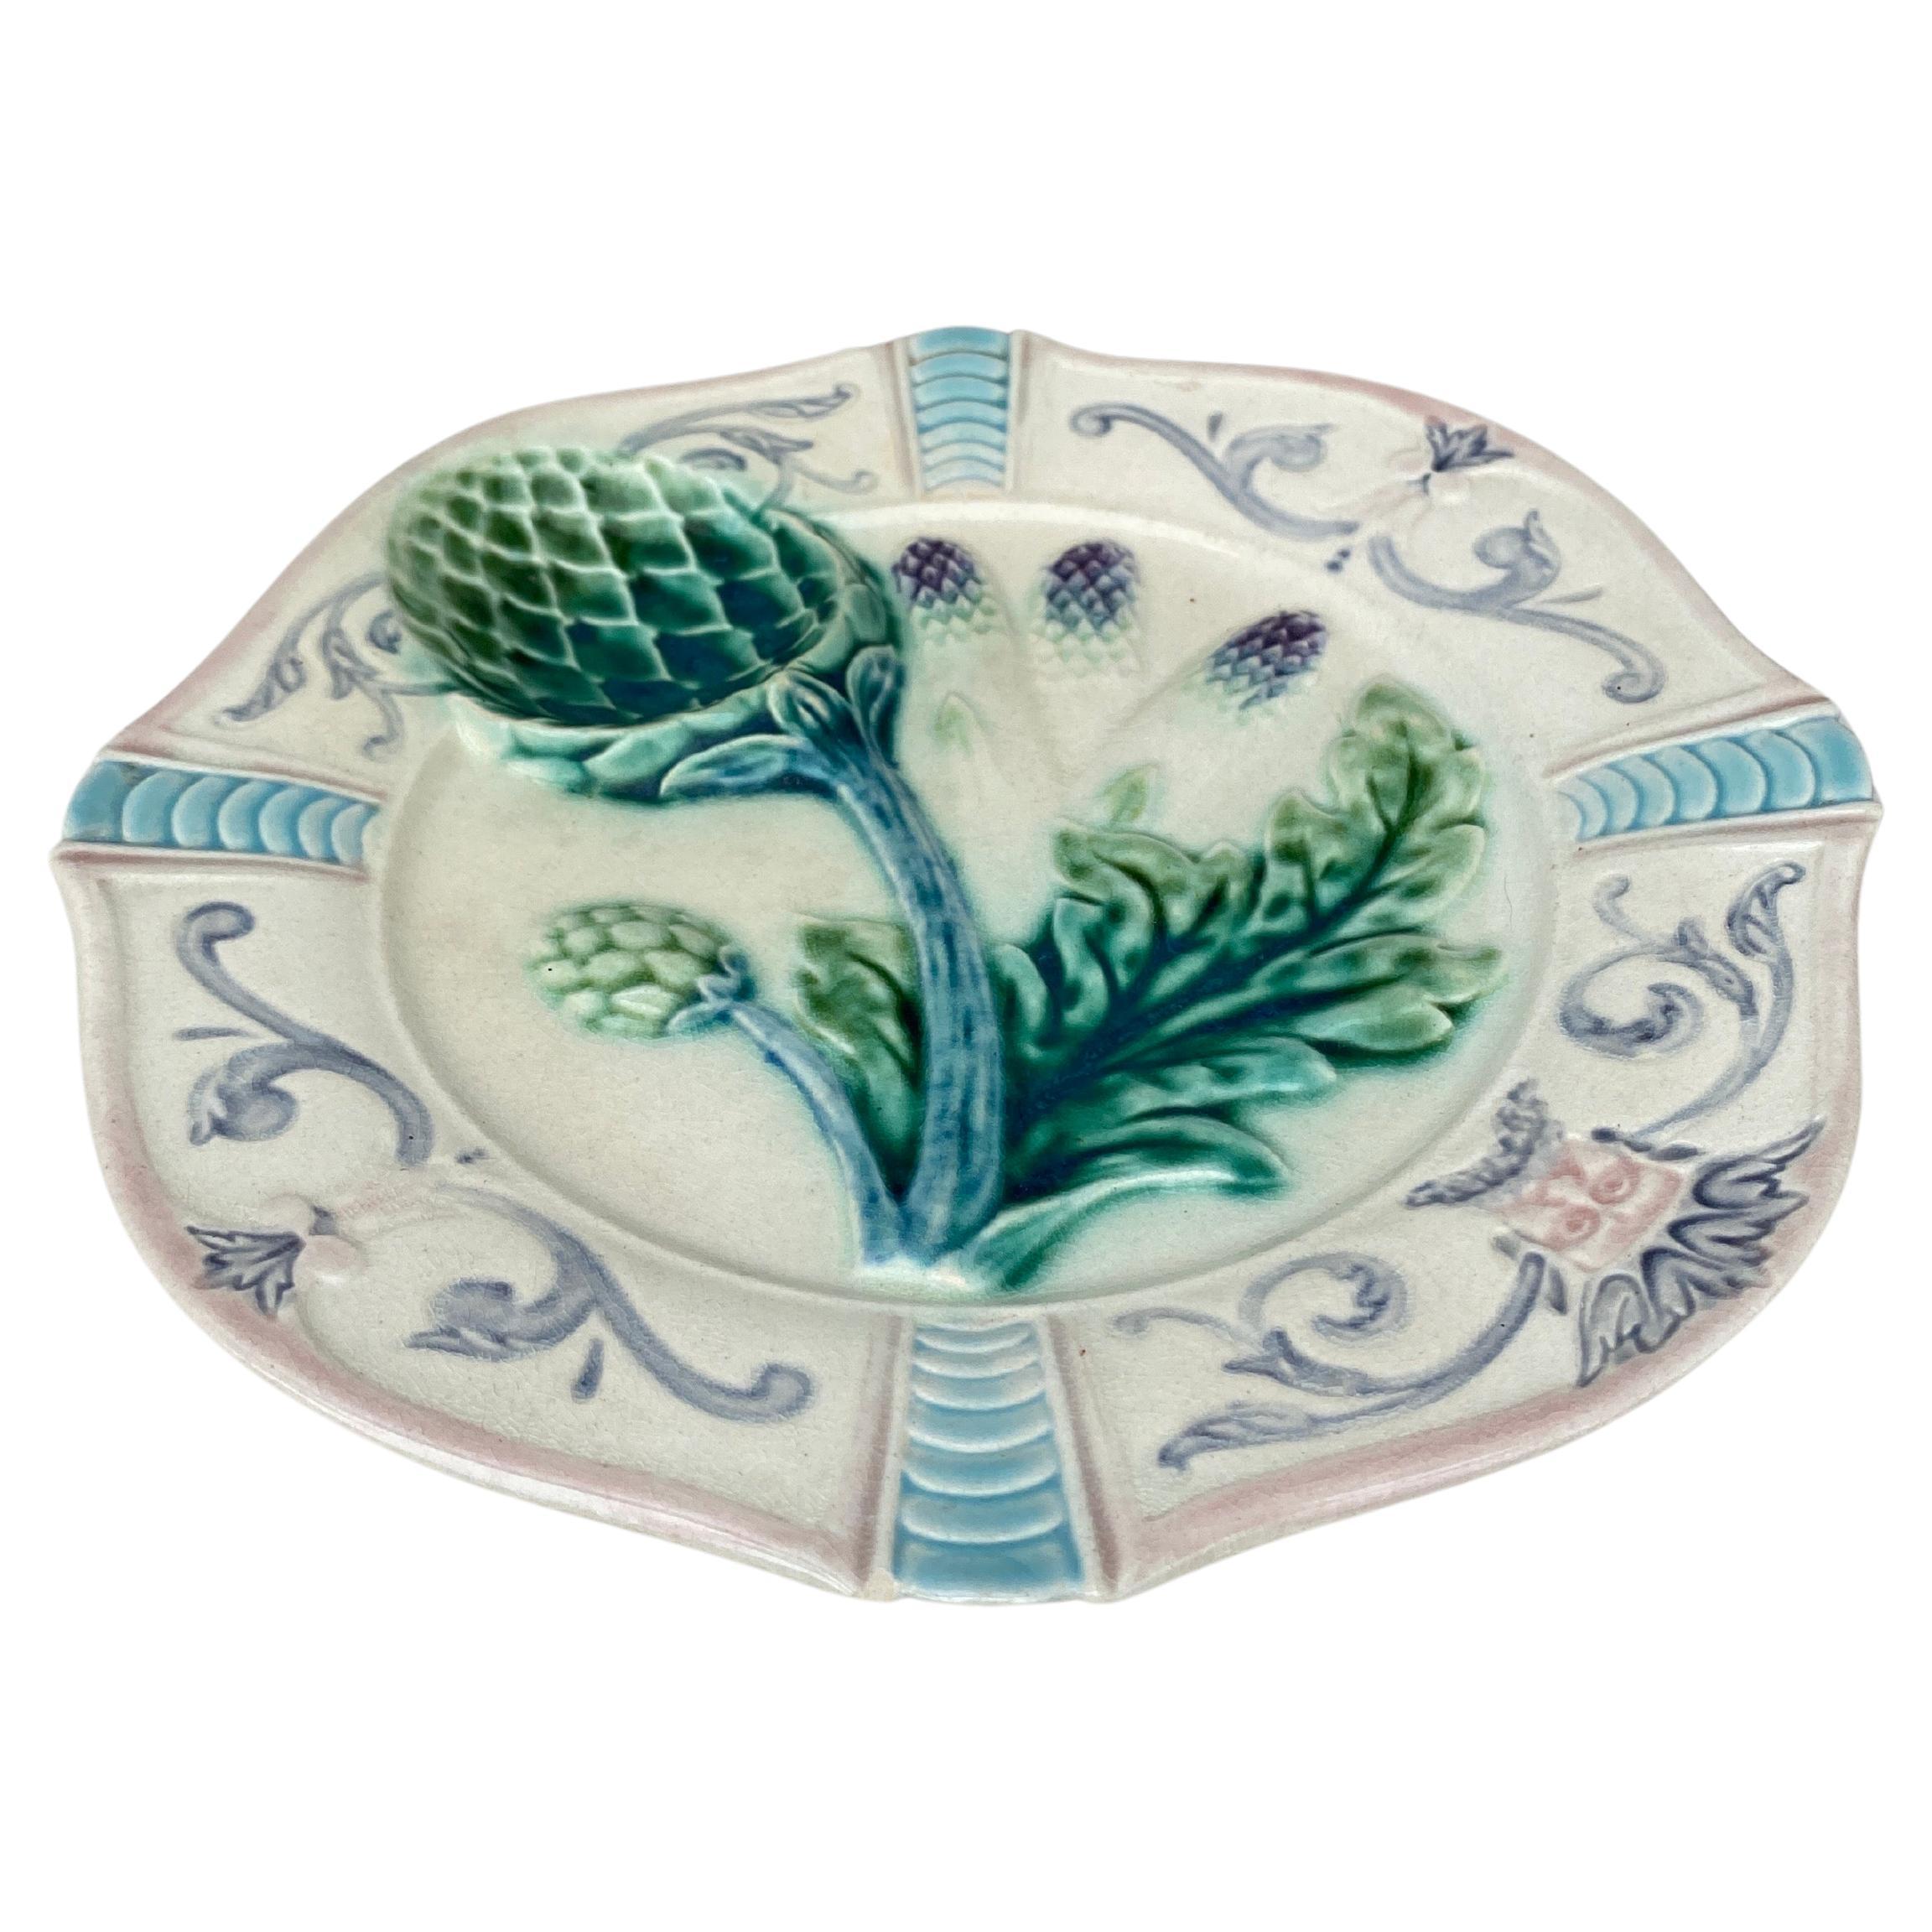 French Majolica asparagus plate Fives Lille, circa 1890.
Decorated with an artichoke and a mask with leaves.